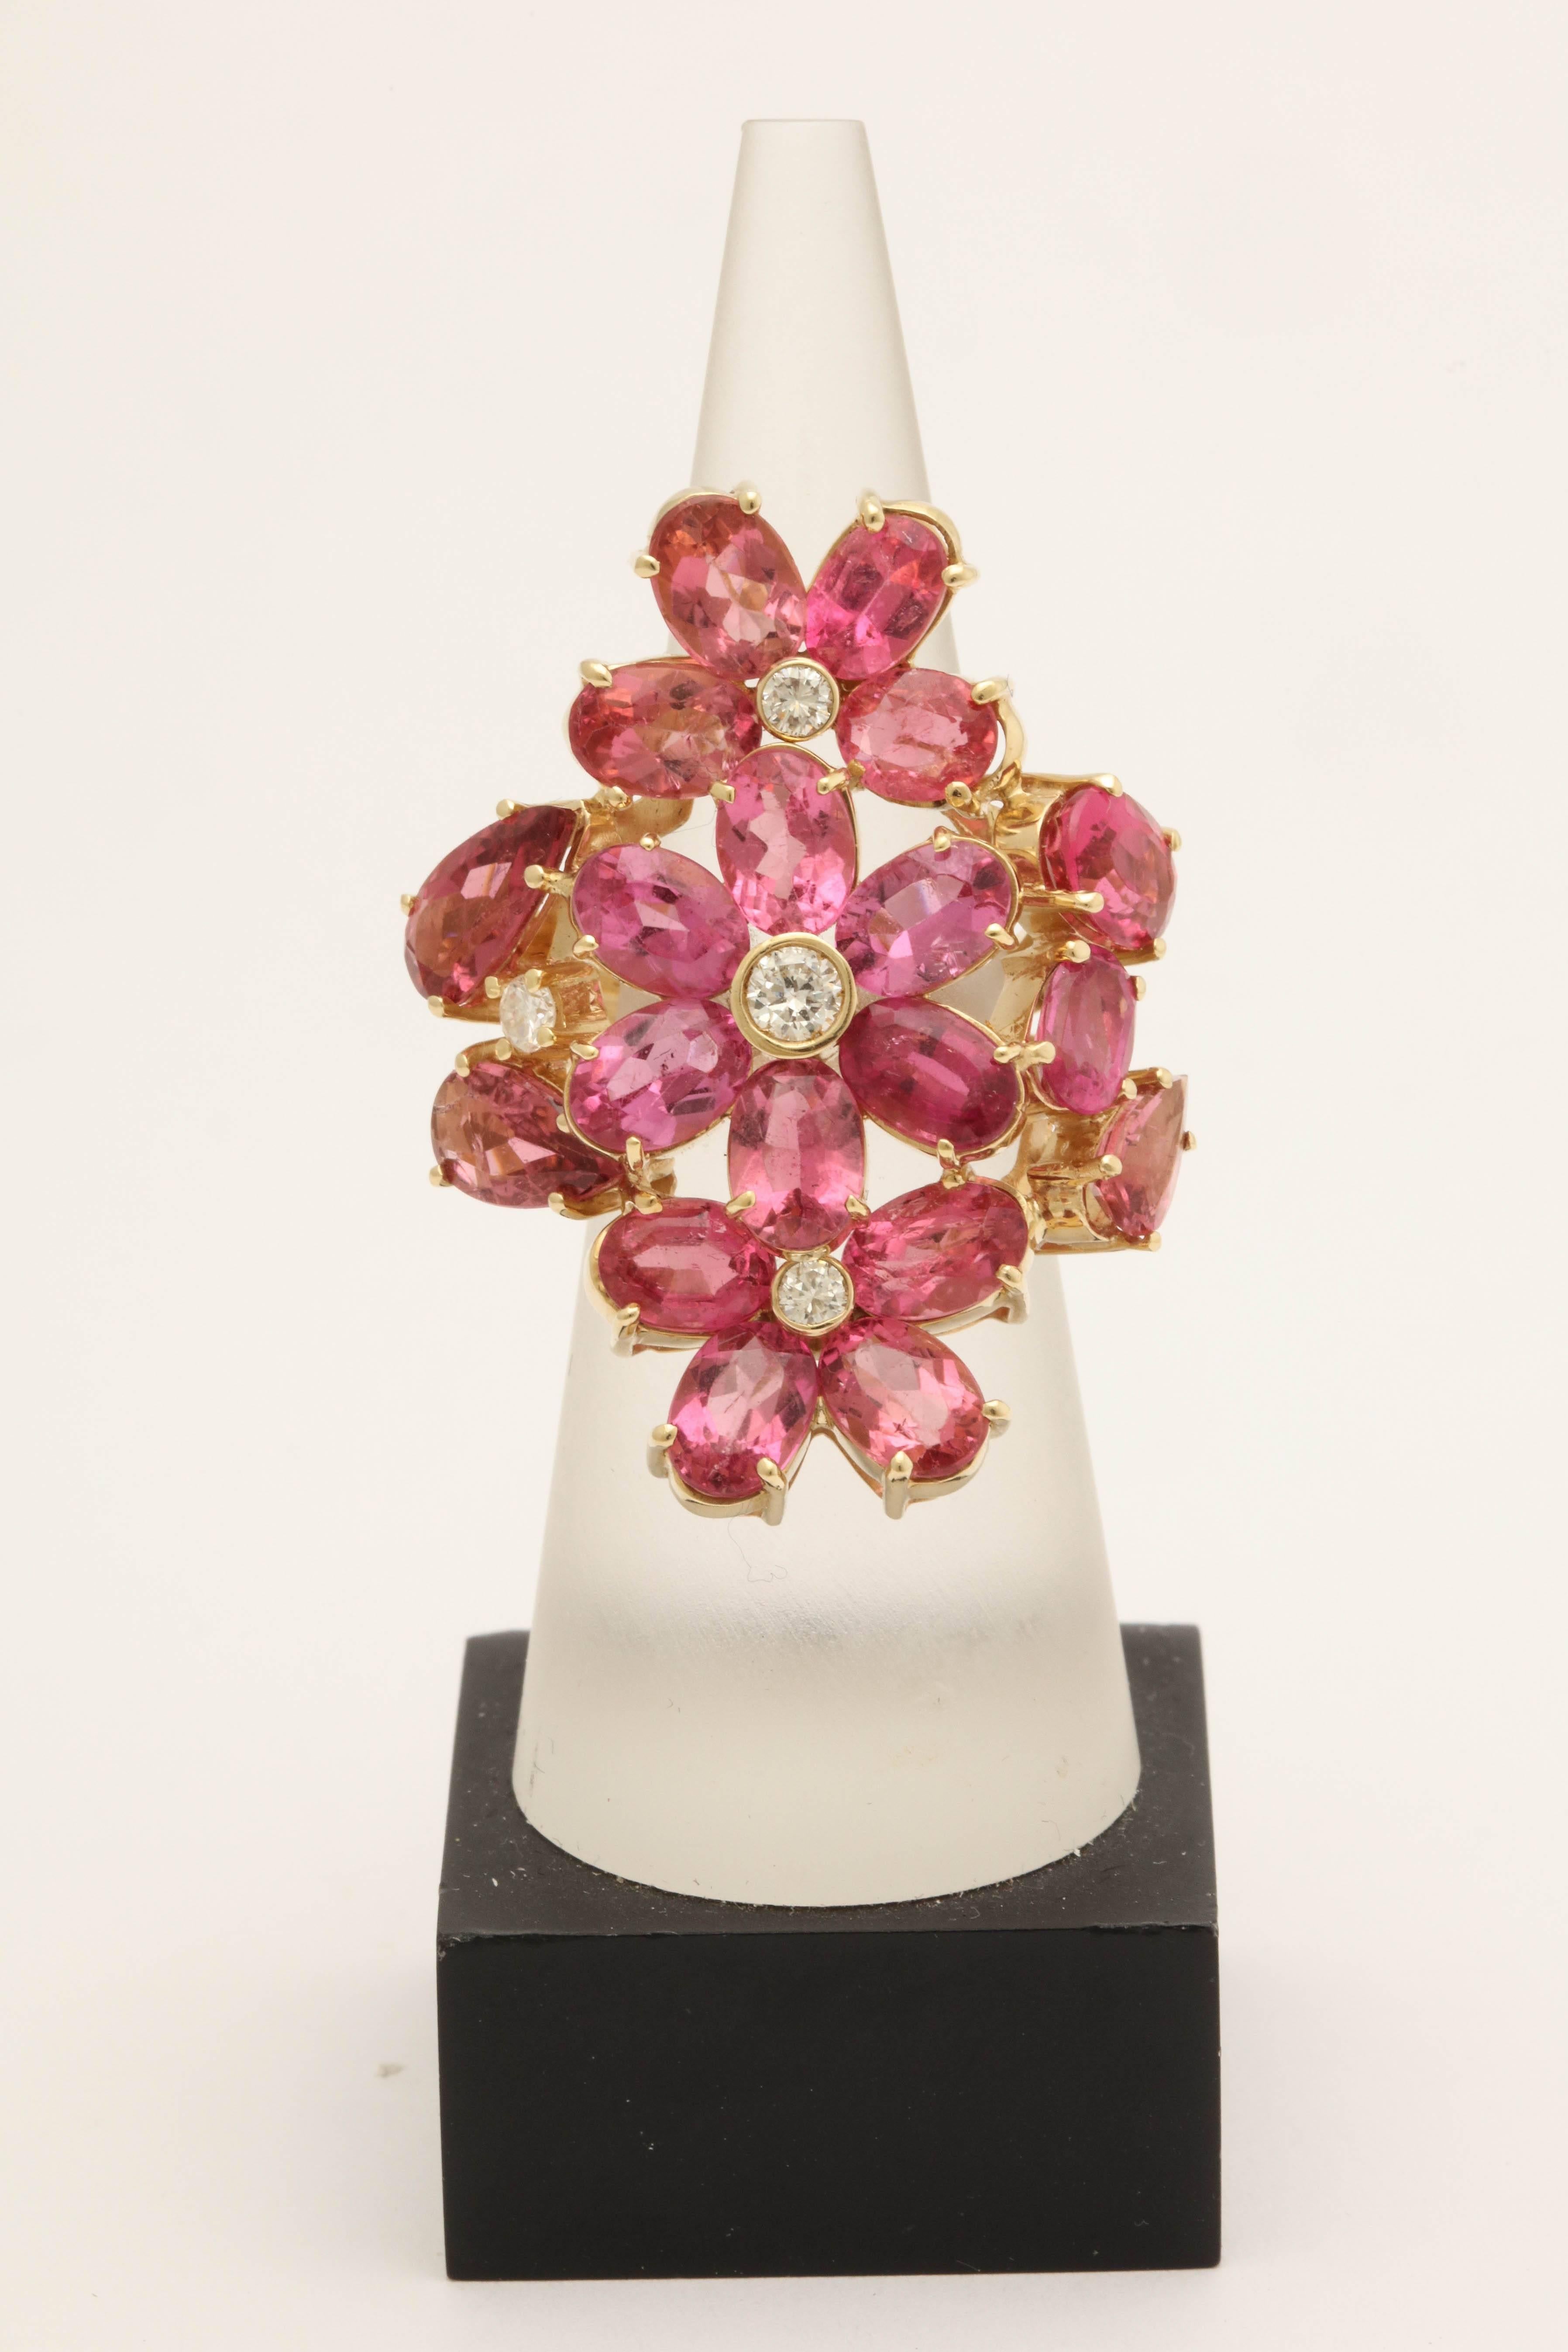 One Large Ladies Impressive Cocktail Ring Set In An 18kt Yellow Gold Setting And Embellished With Numerous Faceted Intense Natural Color Pink Tourmalines Weighing Approximately 5 Carats Total Weight. Cocktail Ring is Further Designed With Four Bezel